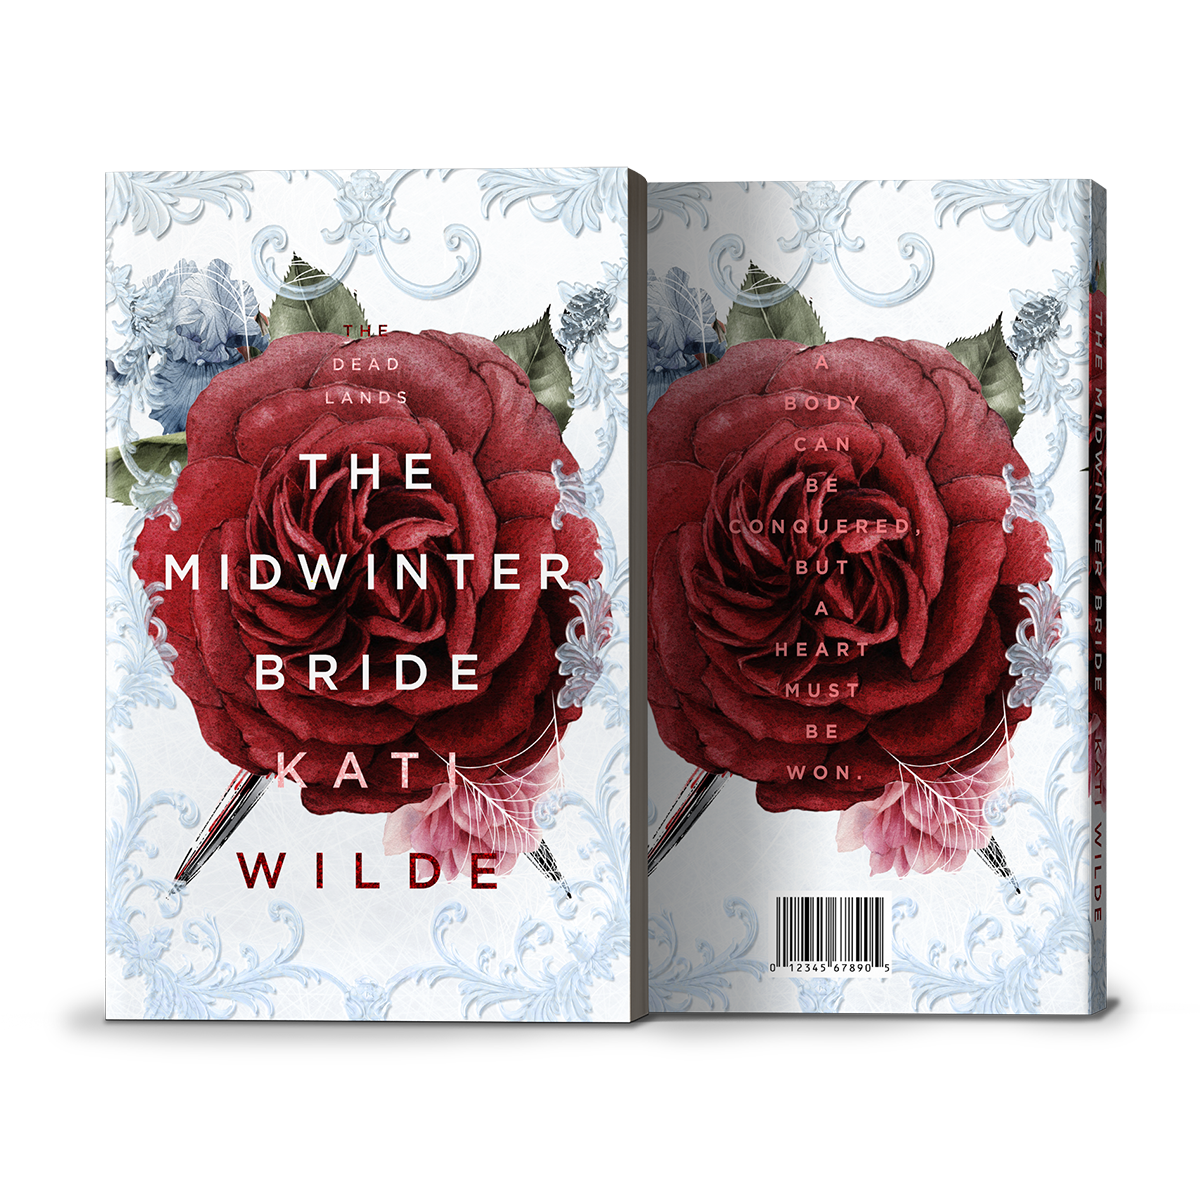 The Midwinter Bride - Discreet Cover